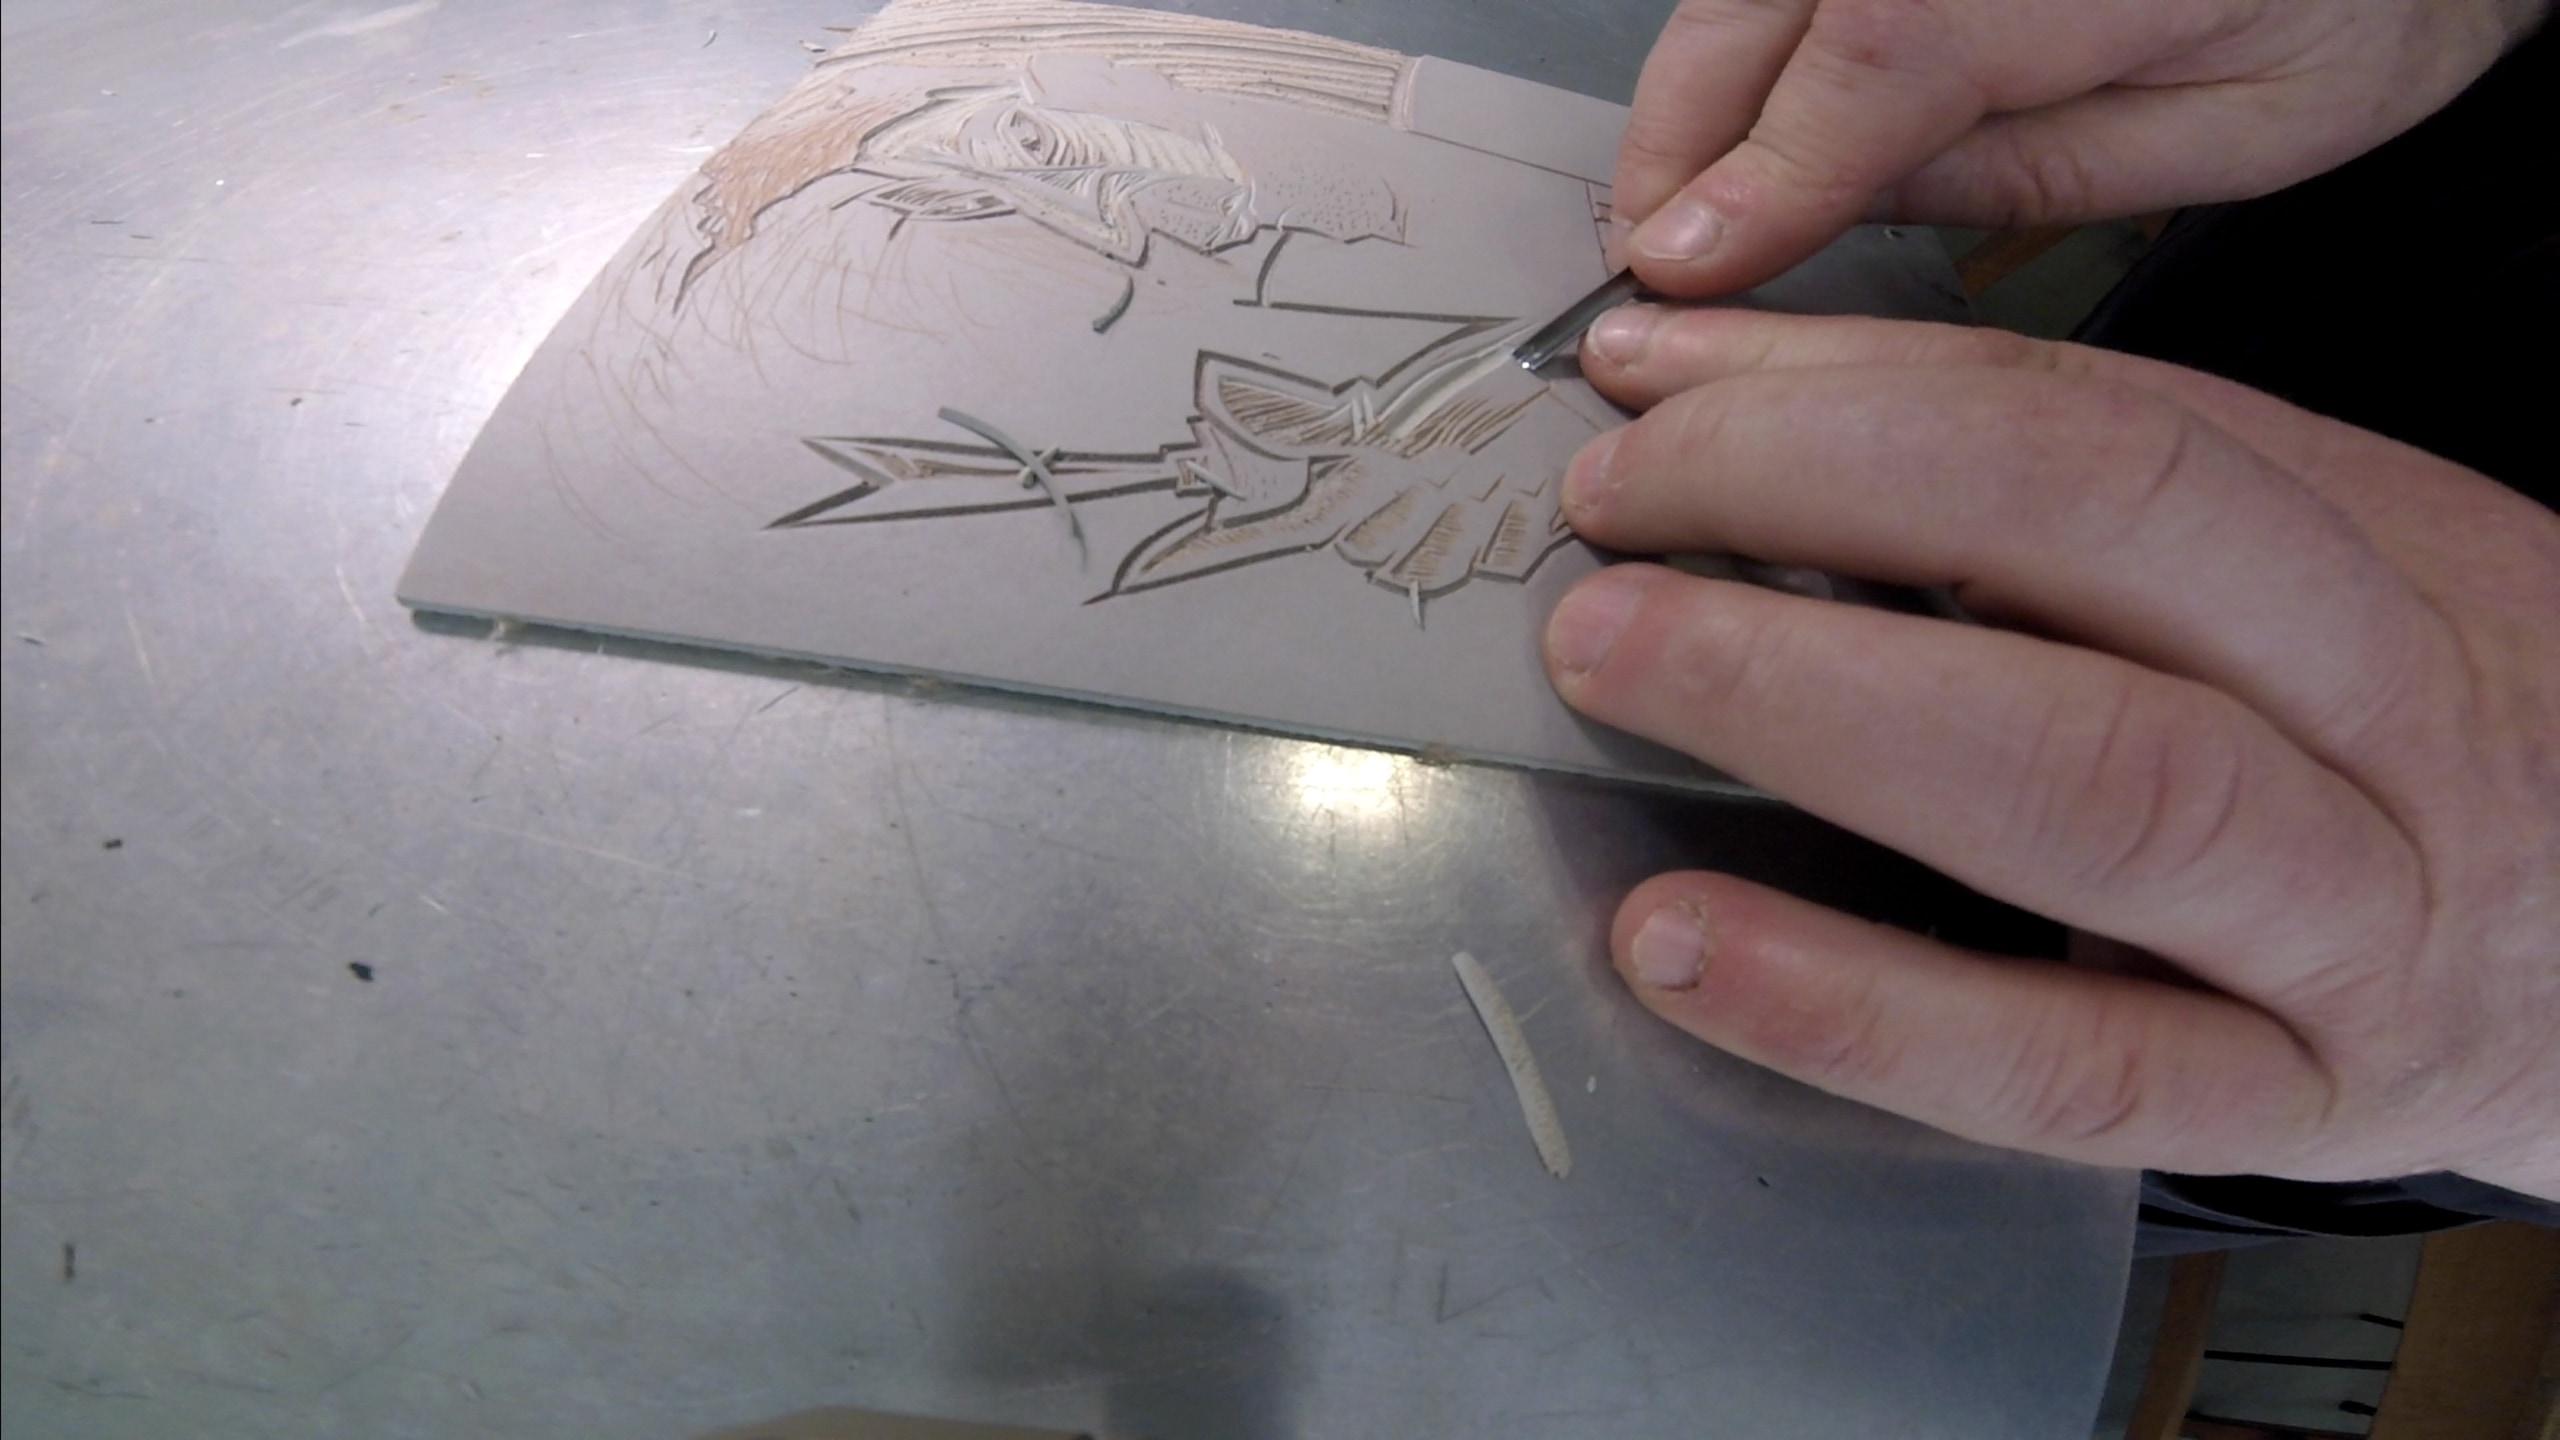 A relief print plate being designed by a person cutting out lines for the ink to flow